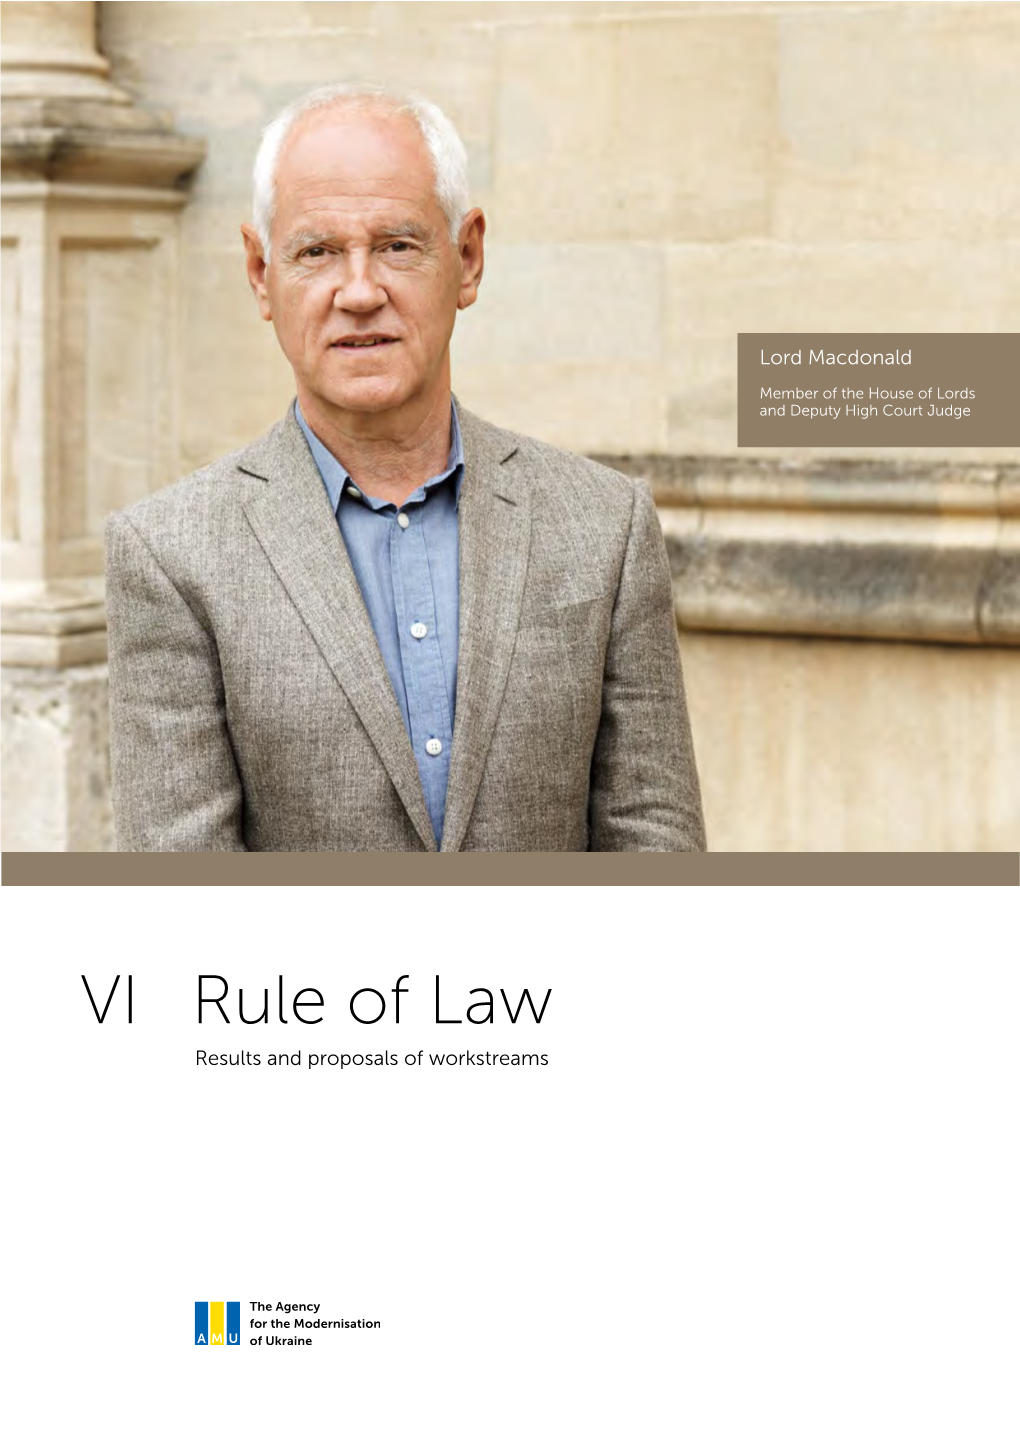 VI Rule of Law Results and Proposals of Workstreams Management Summary